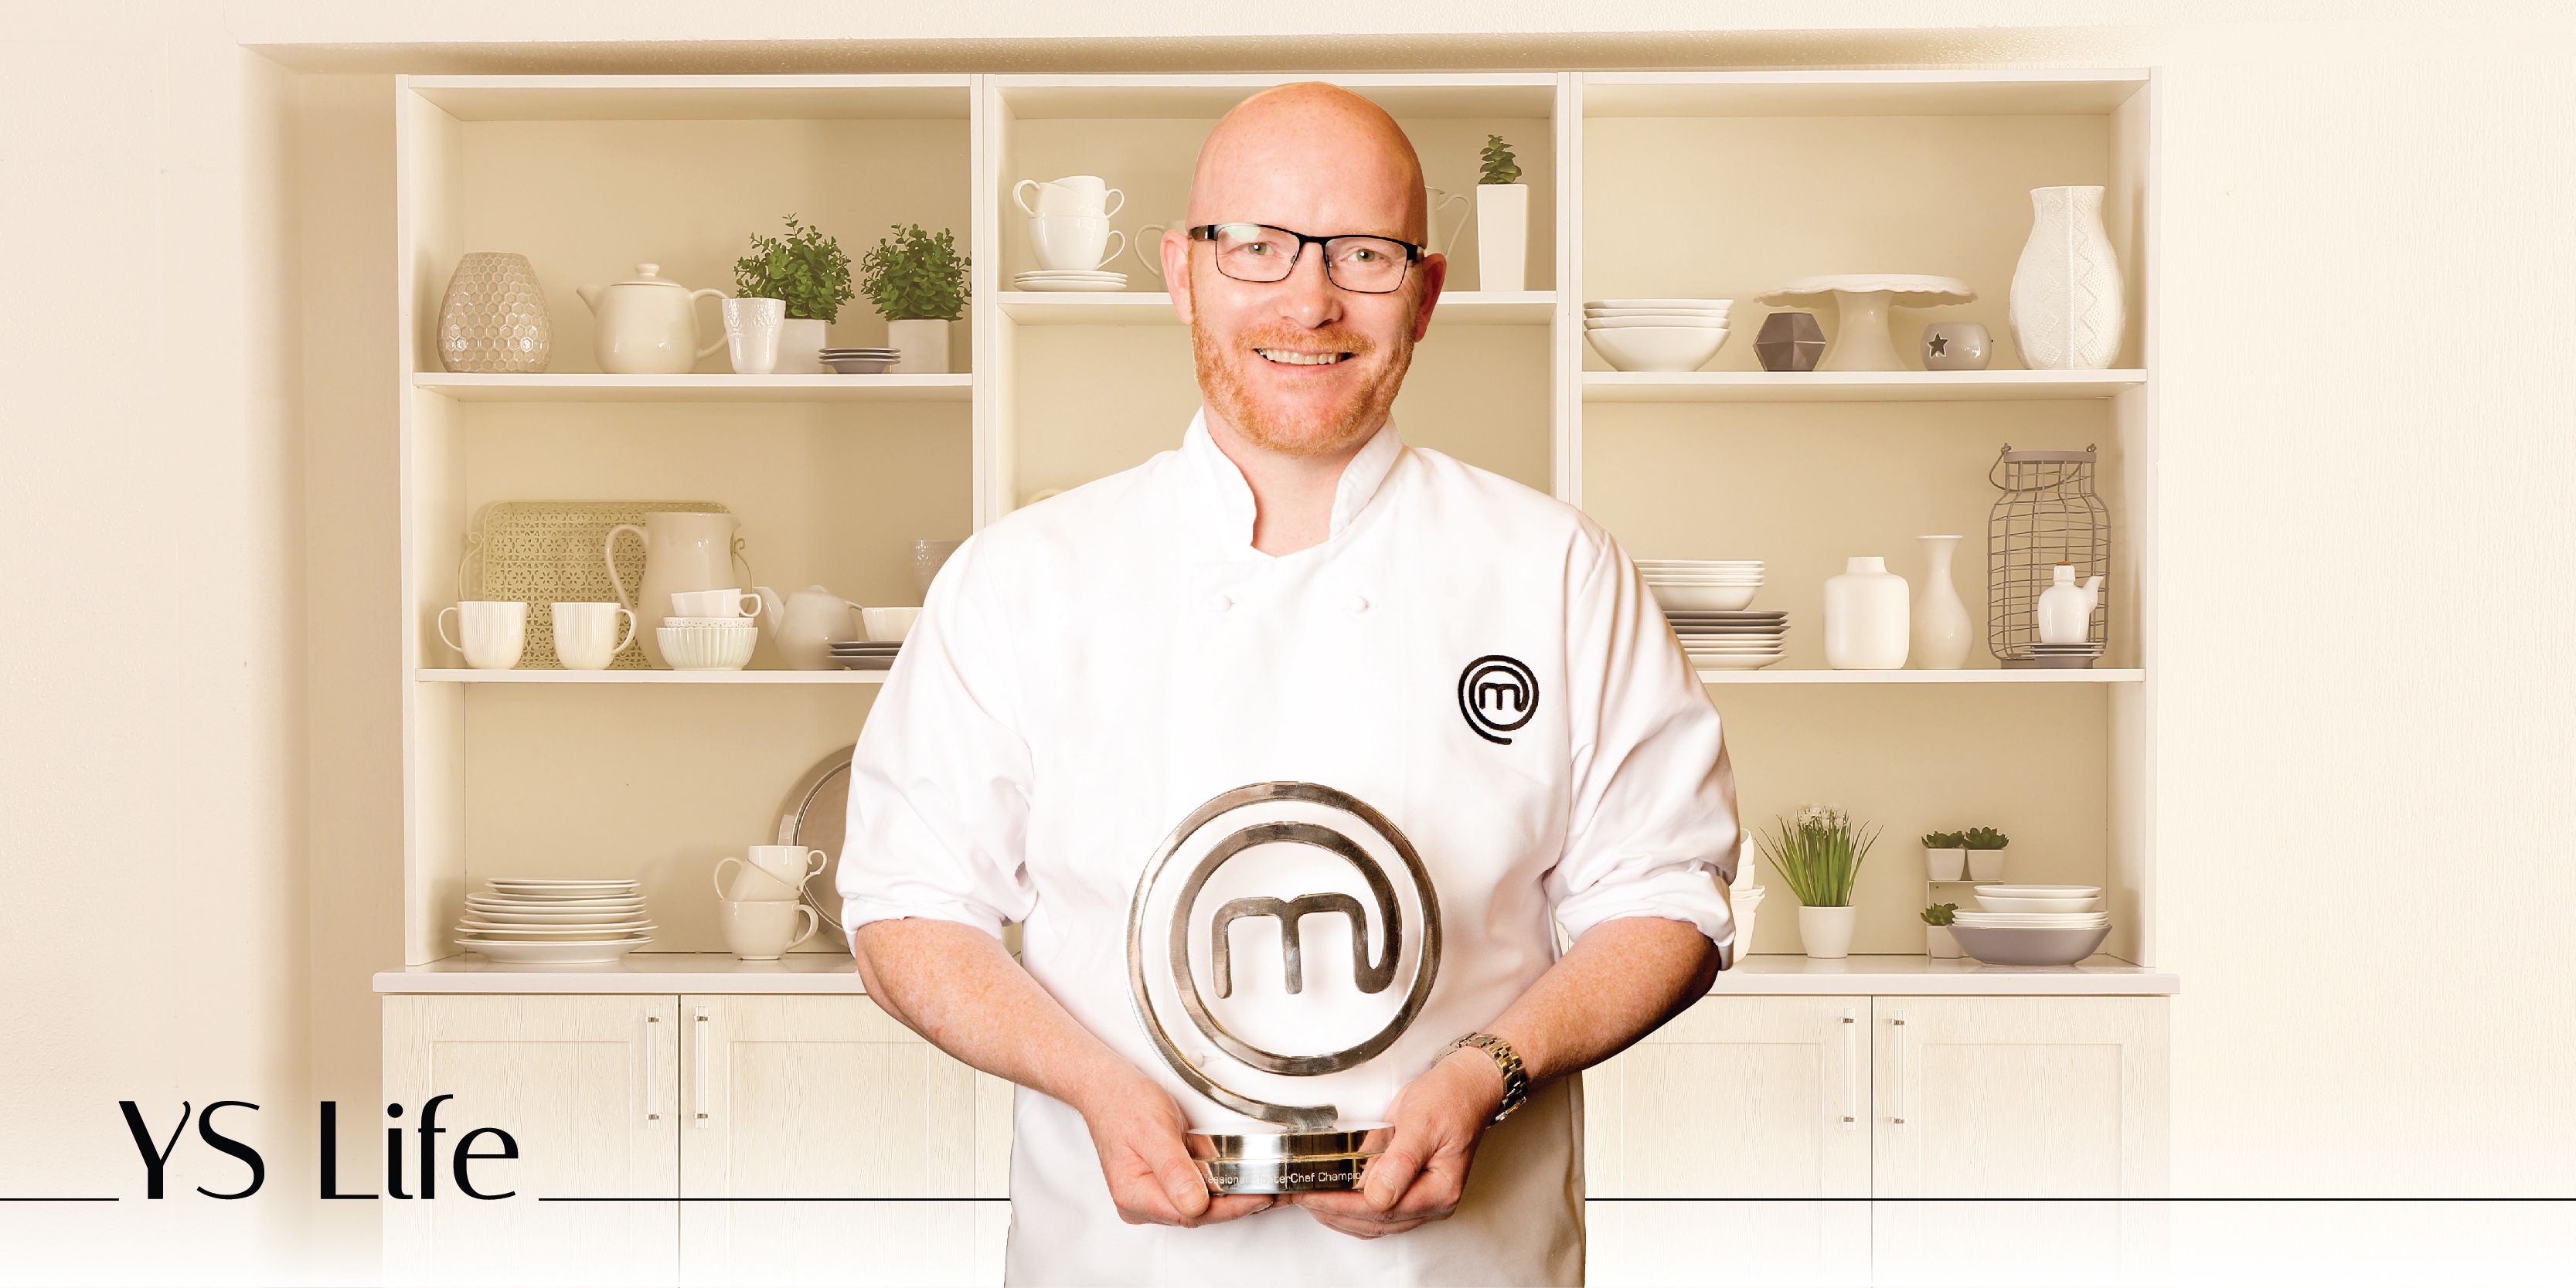 Scotland’s National Chef Gary Maclean spills the sauce on his Indian connection